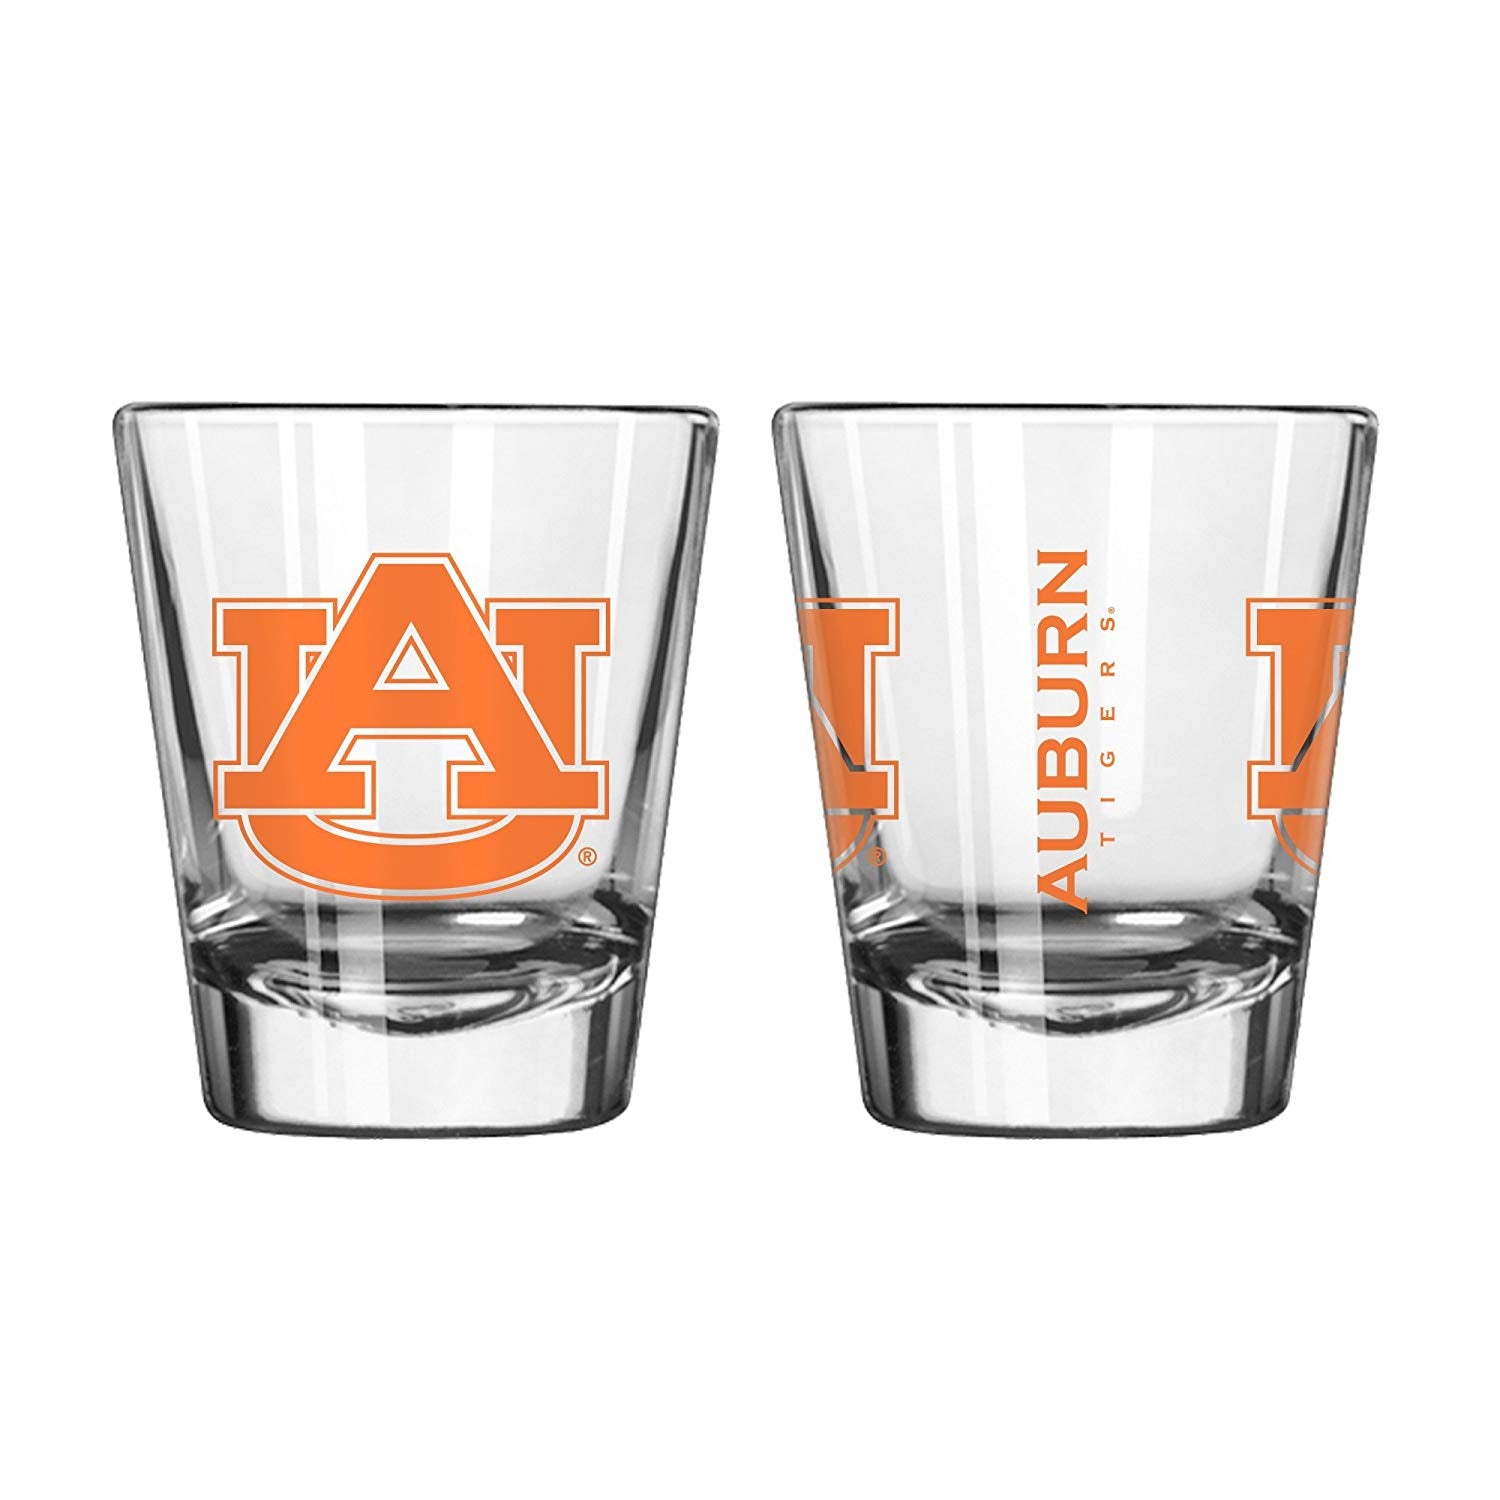 Official Fan Shop Authentic NCAA Logo 2 oz. Shot Glasses 2-Pack Bundle. Show your School and Team Pride at home, your Bar or at the Tailgate. Great Collegiate Gift